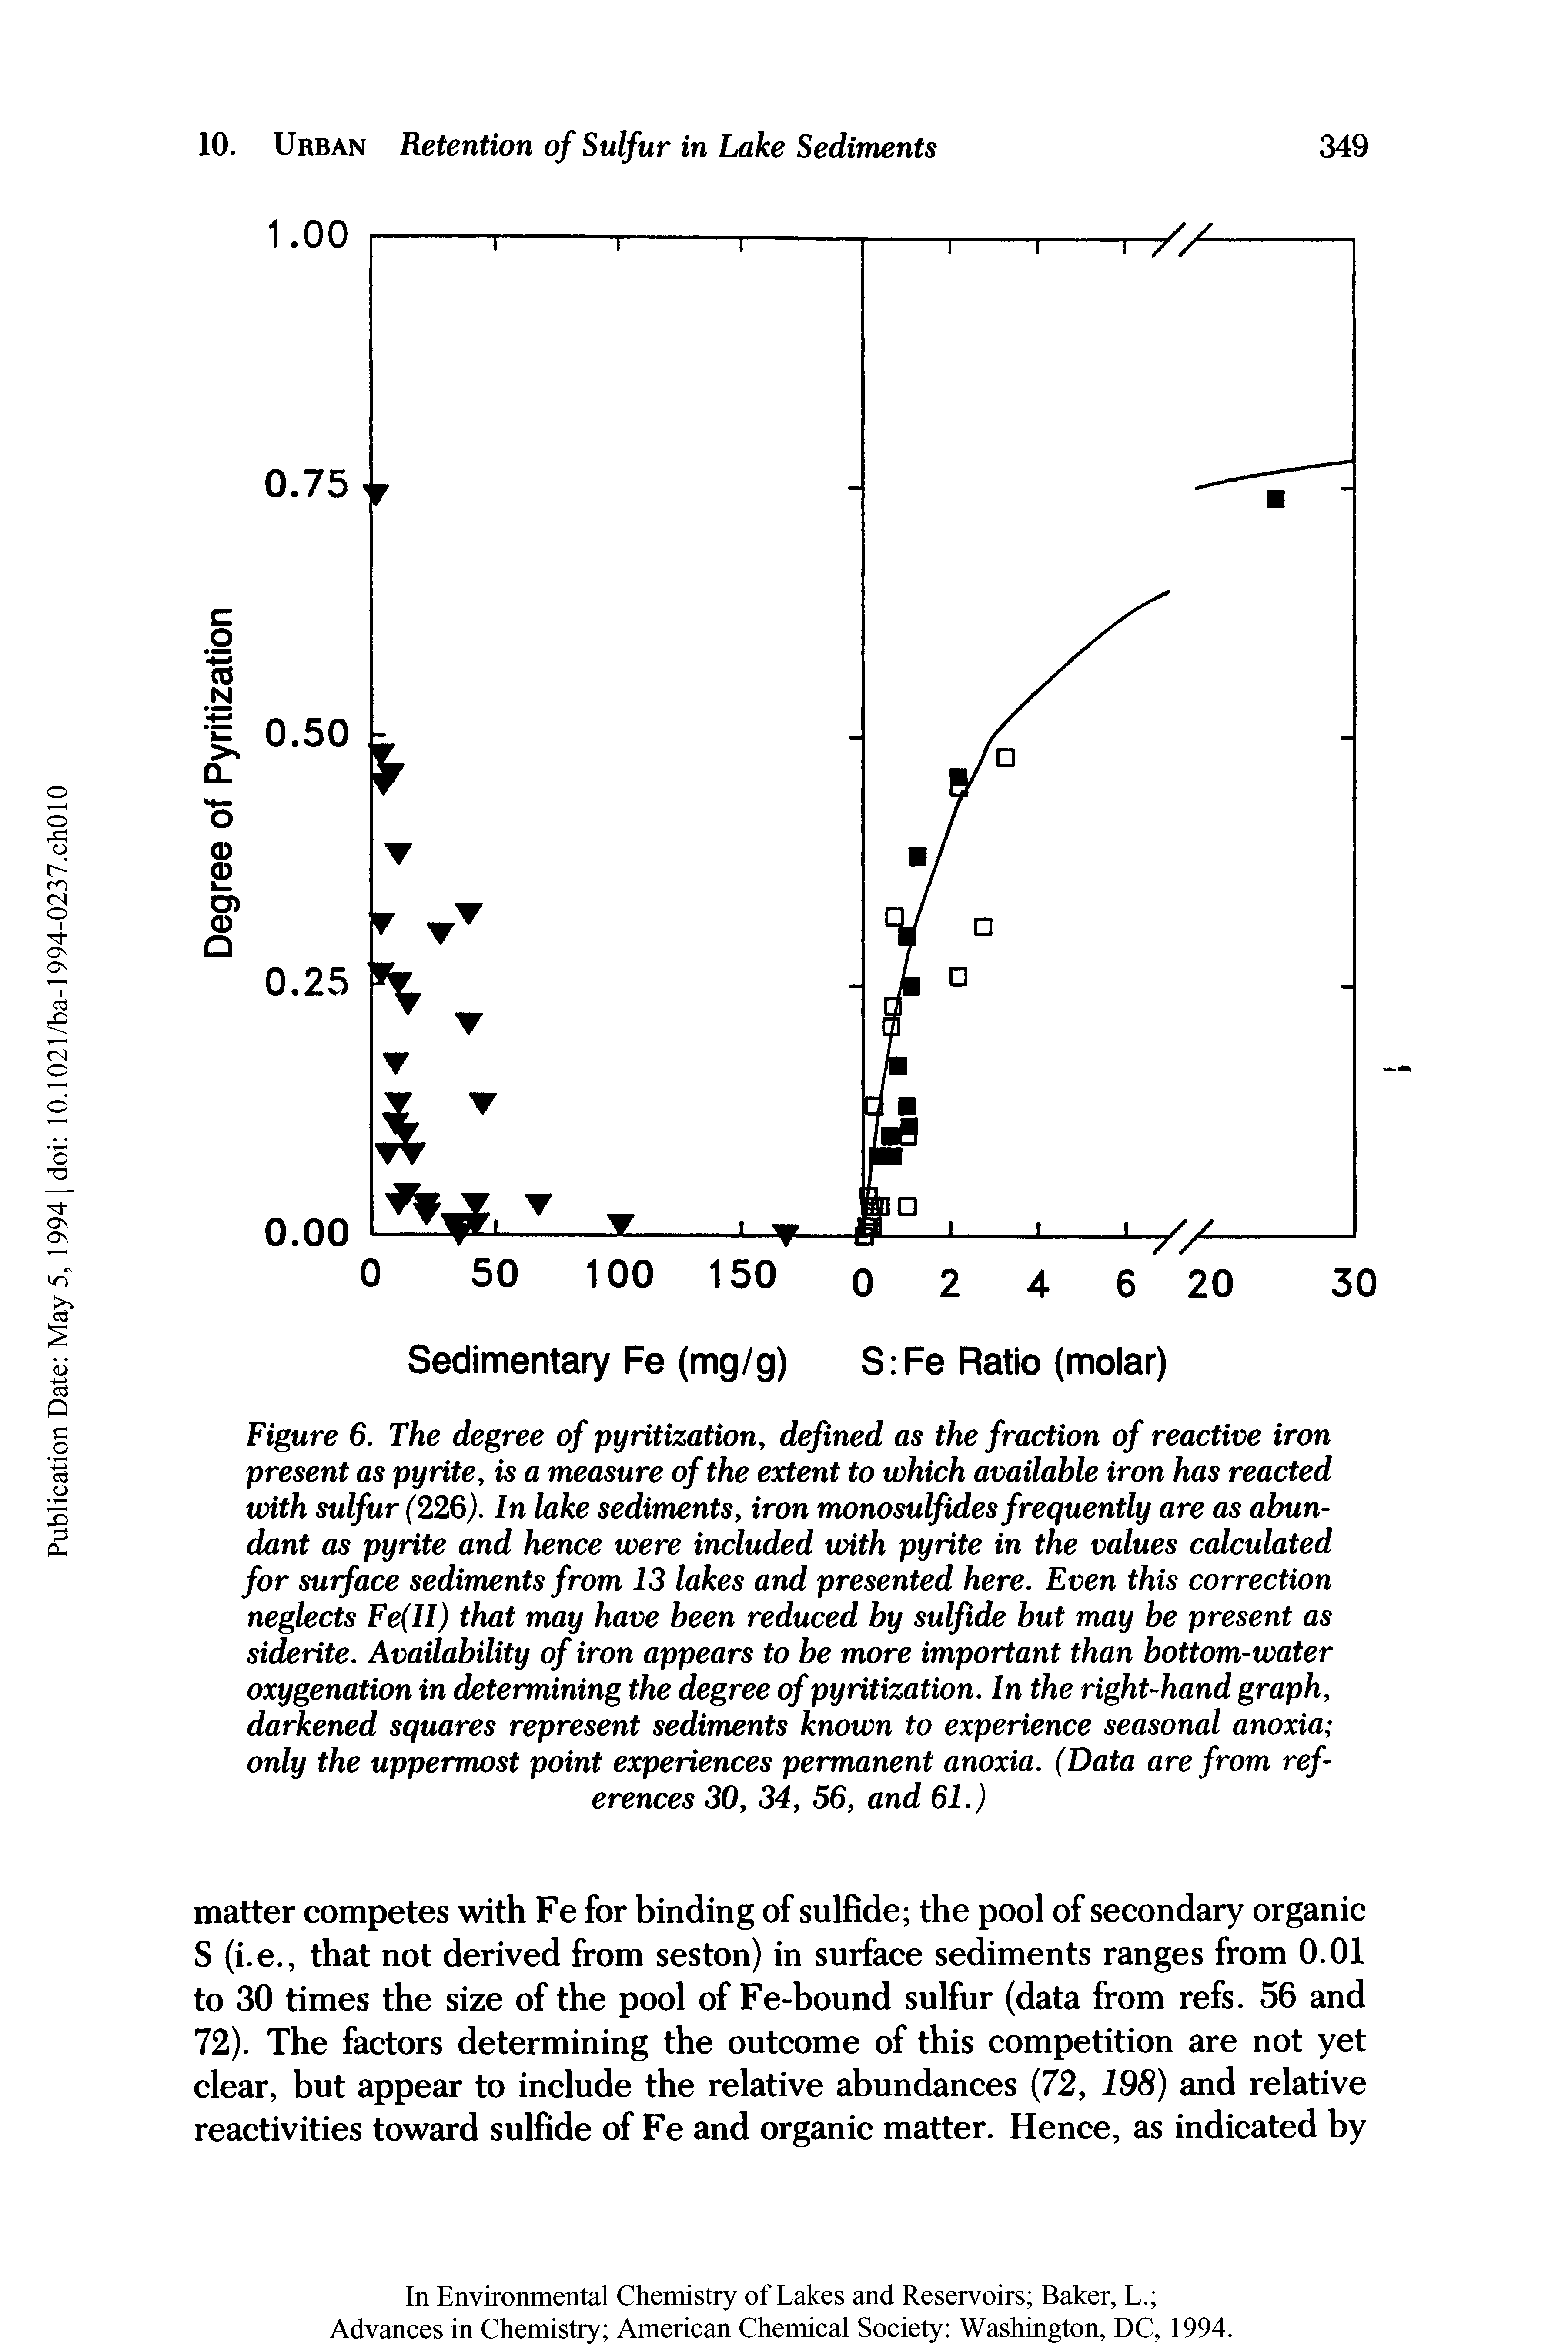 Figure 6. The degree of pyritization, defined as the fraction of reactive iron present as pyrite, is a measure of the extent to which available iron has reacted with sulfur (226). In lake sediments, iron monosulfides frequently are as abundant as pyrite and hence were included with pyrite in the values calculated for surface sediments from 13 lakes and presented here. Even this correction neglects Fe(II) that may have been reduced by sulfide but may be present as siderite. Availability of iron appears to be more important than bottom-water oxygenation in determining the degree of pyritization. In the right-hand graph, darkened squares represent sediments known to experience seasonal anoxia only the uppermost point experiences permanent anoxia. (Data are from references 30, 34, 56, and 61.)...